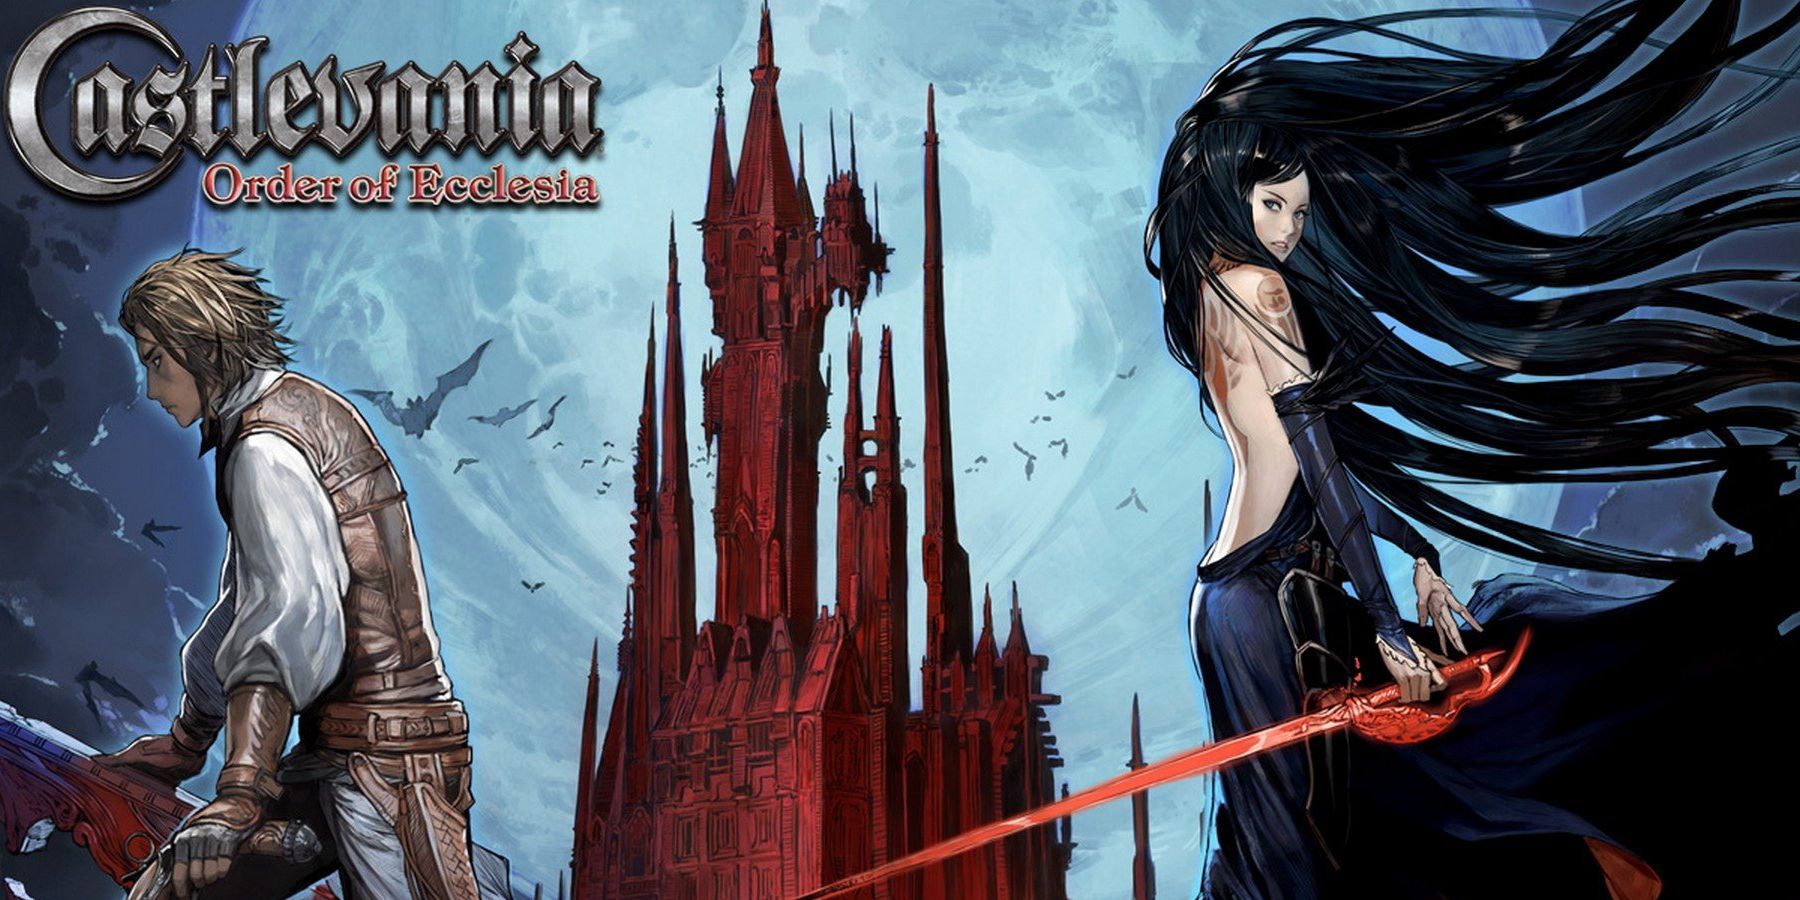 Castlevania- Order of Ecclesia Two main characters stand either side of Draculas Castle